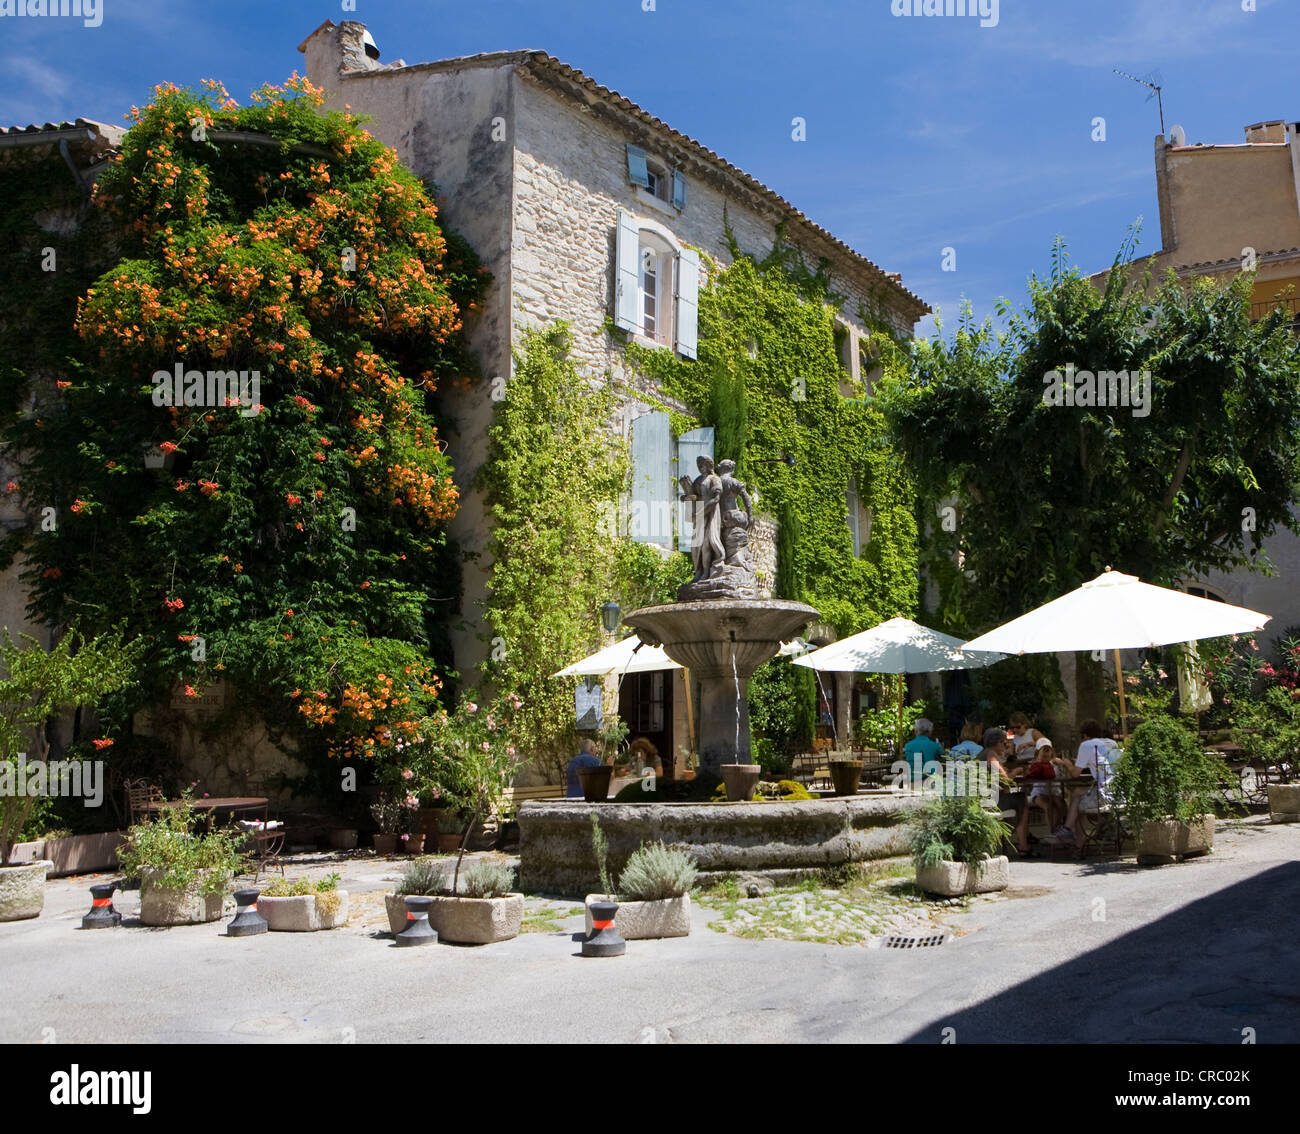 Street cafe in Saignon, Vaucluse, Provence-Alpes-Côte d'Azur, in Francia, Foto Stock